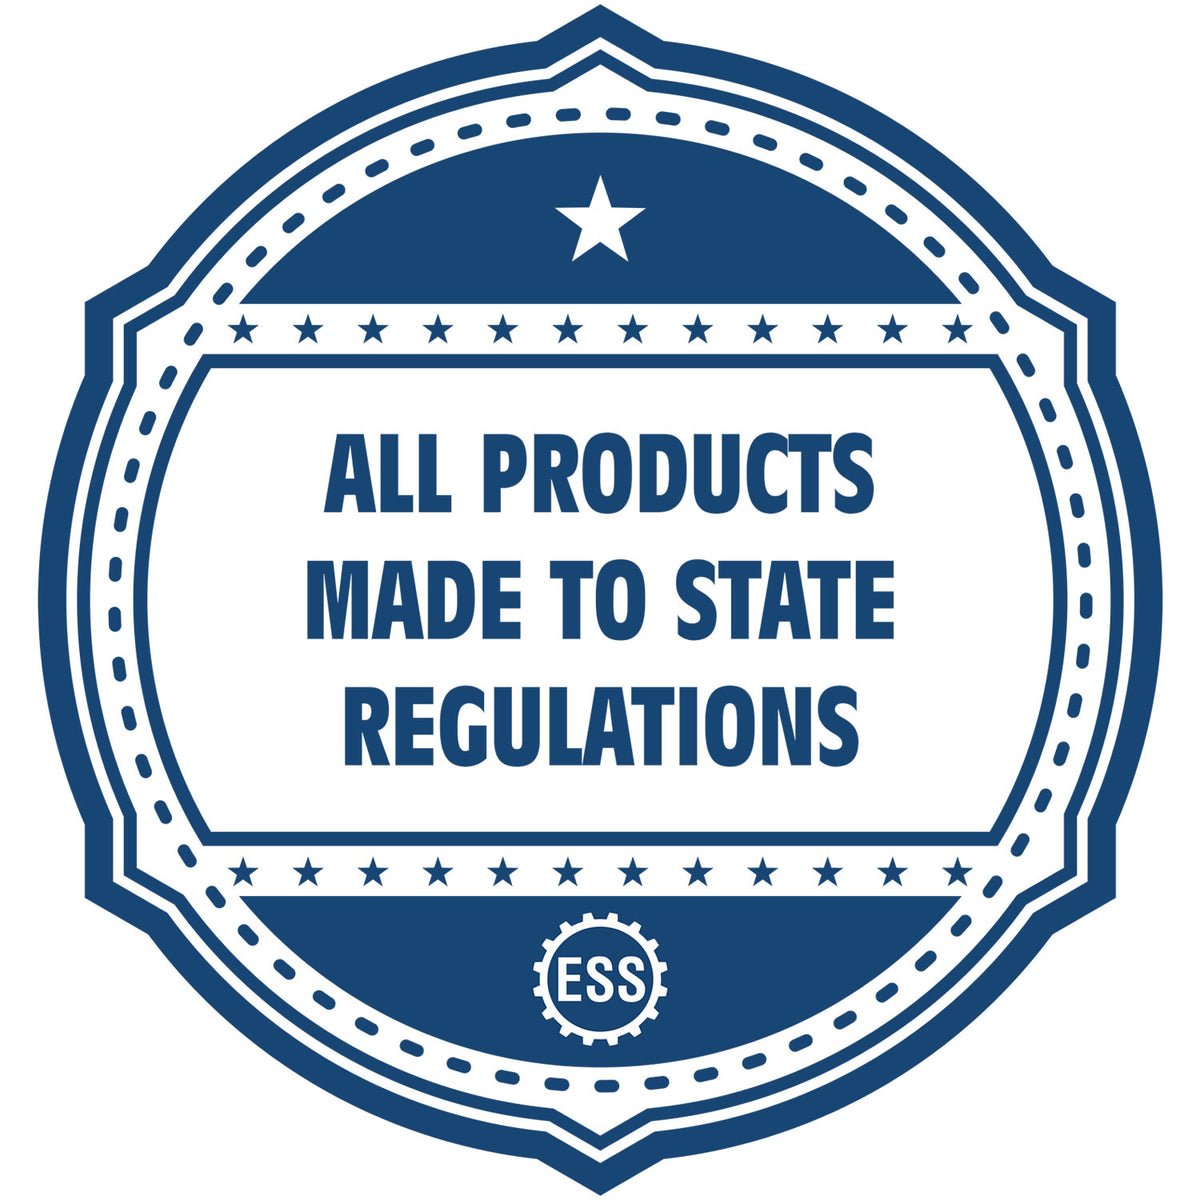 An icon or badge element for the Wooden Handle Minnesota State Seal Notary Public Stamp showing that this product is made in compliance with state regulations.